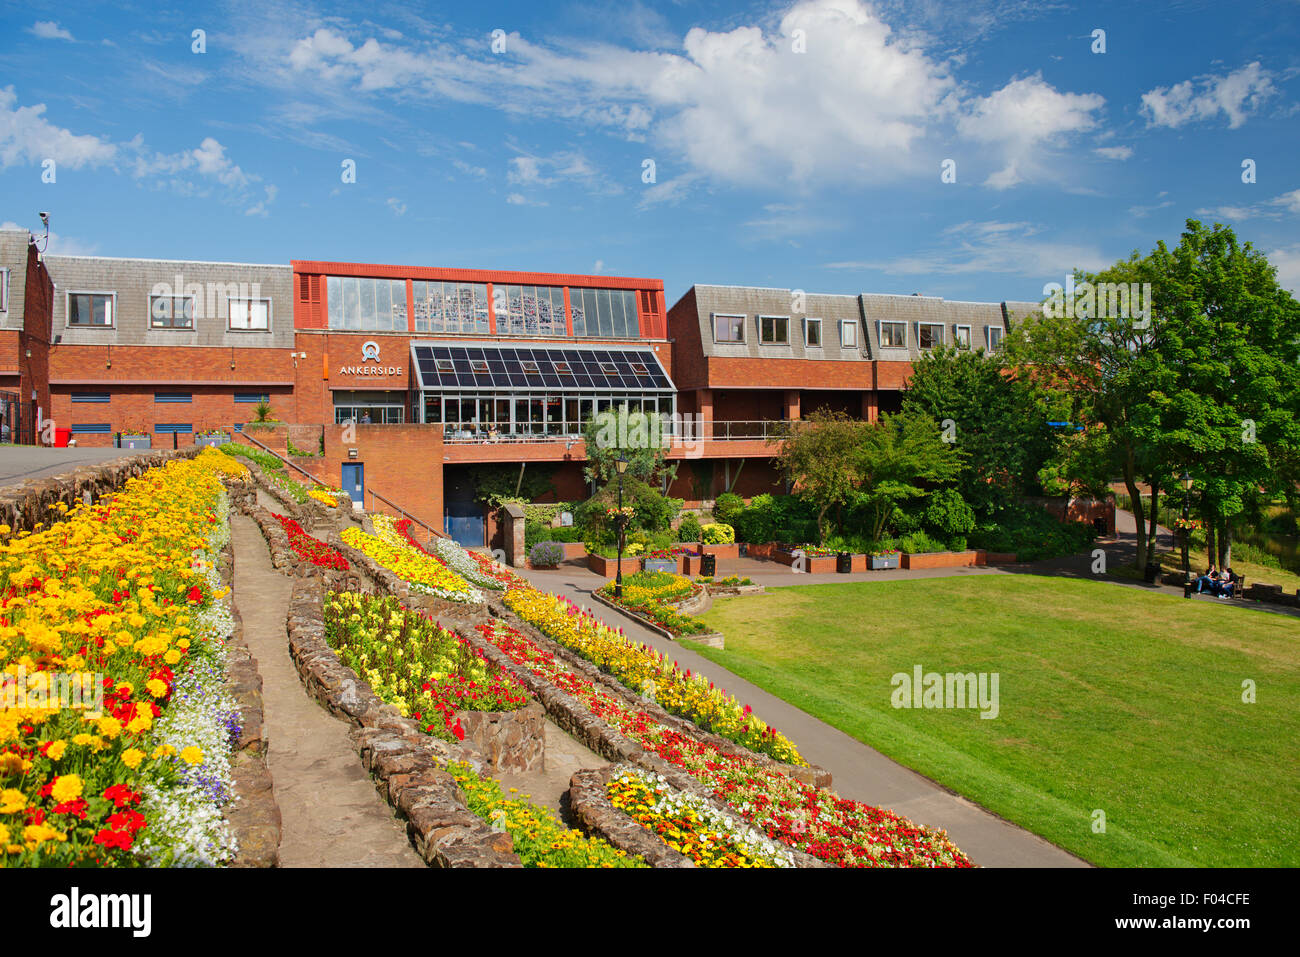 Ankerside Shopping Centre and Castle Park gardens, Tamworth, Staffordshire Stock Photo